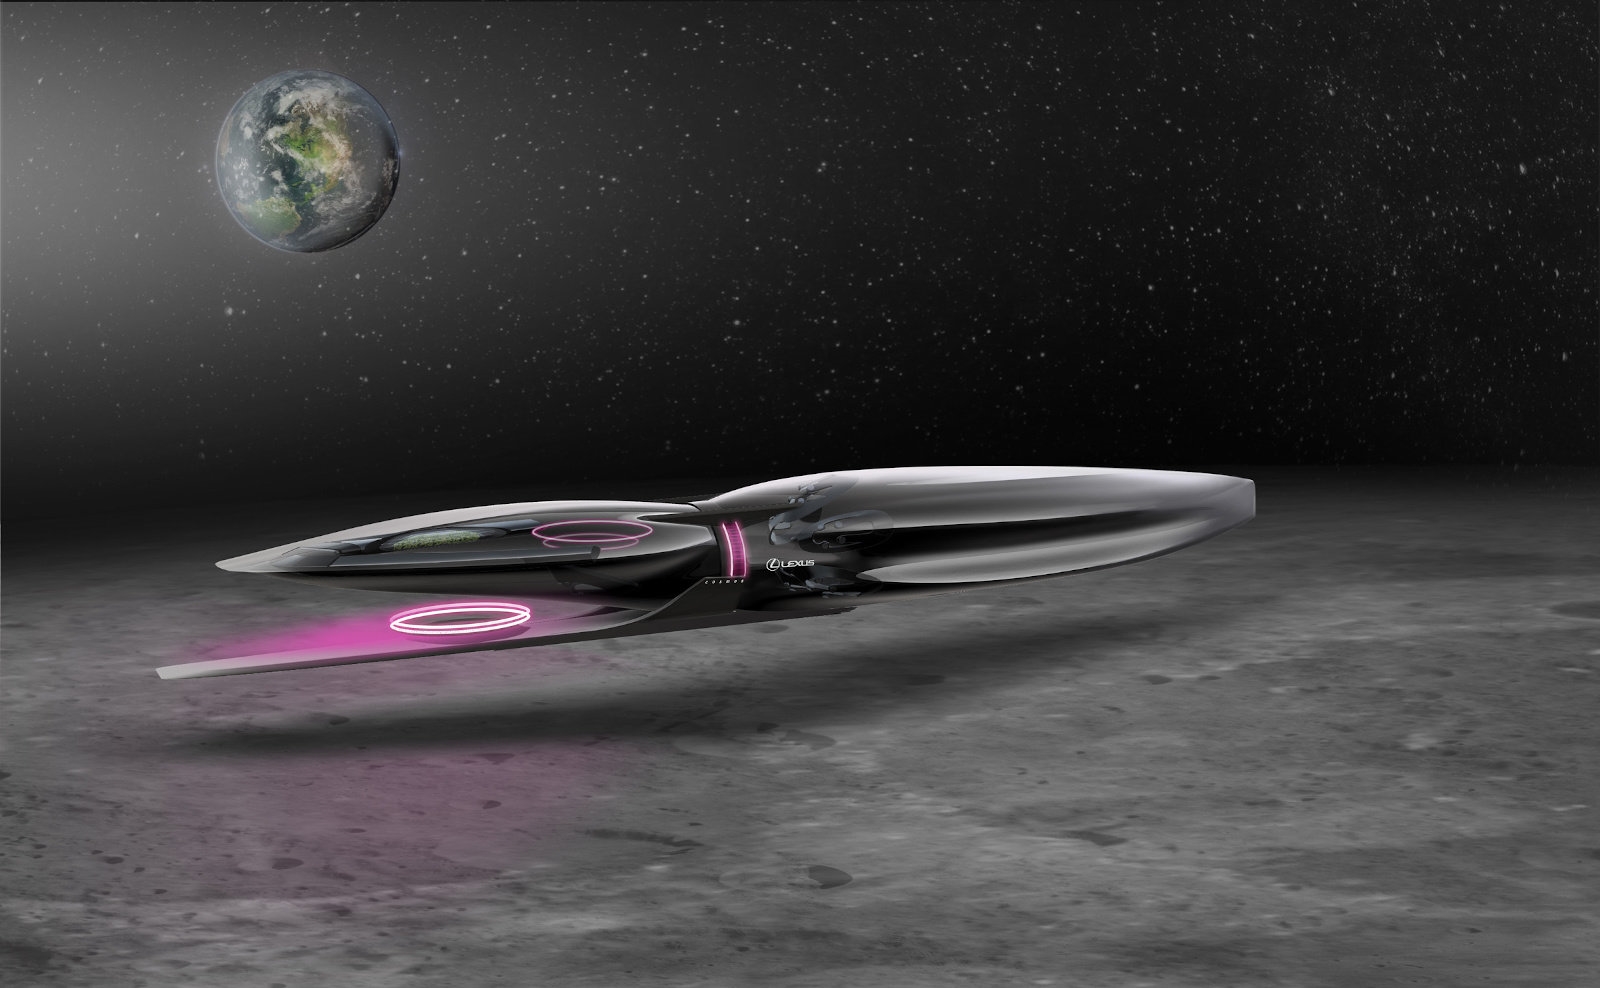 Lexus imagines space vehicles for humans on the Moon | DeviceDaily.com